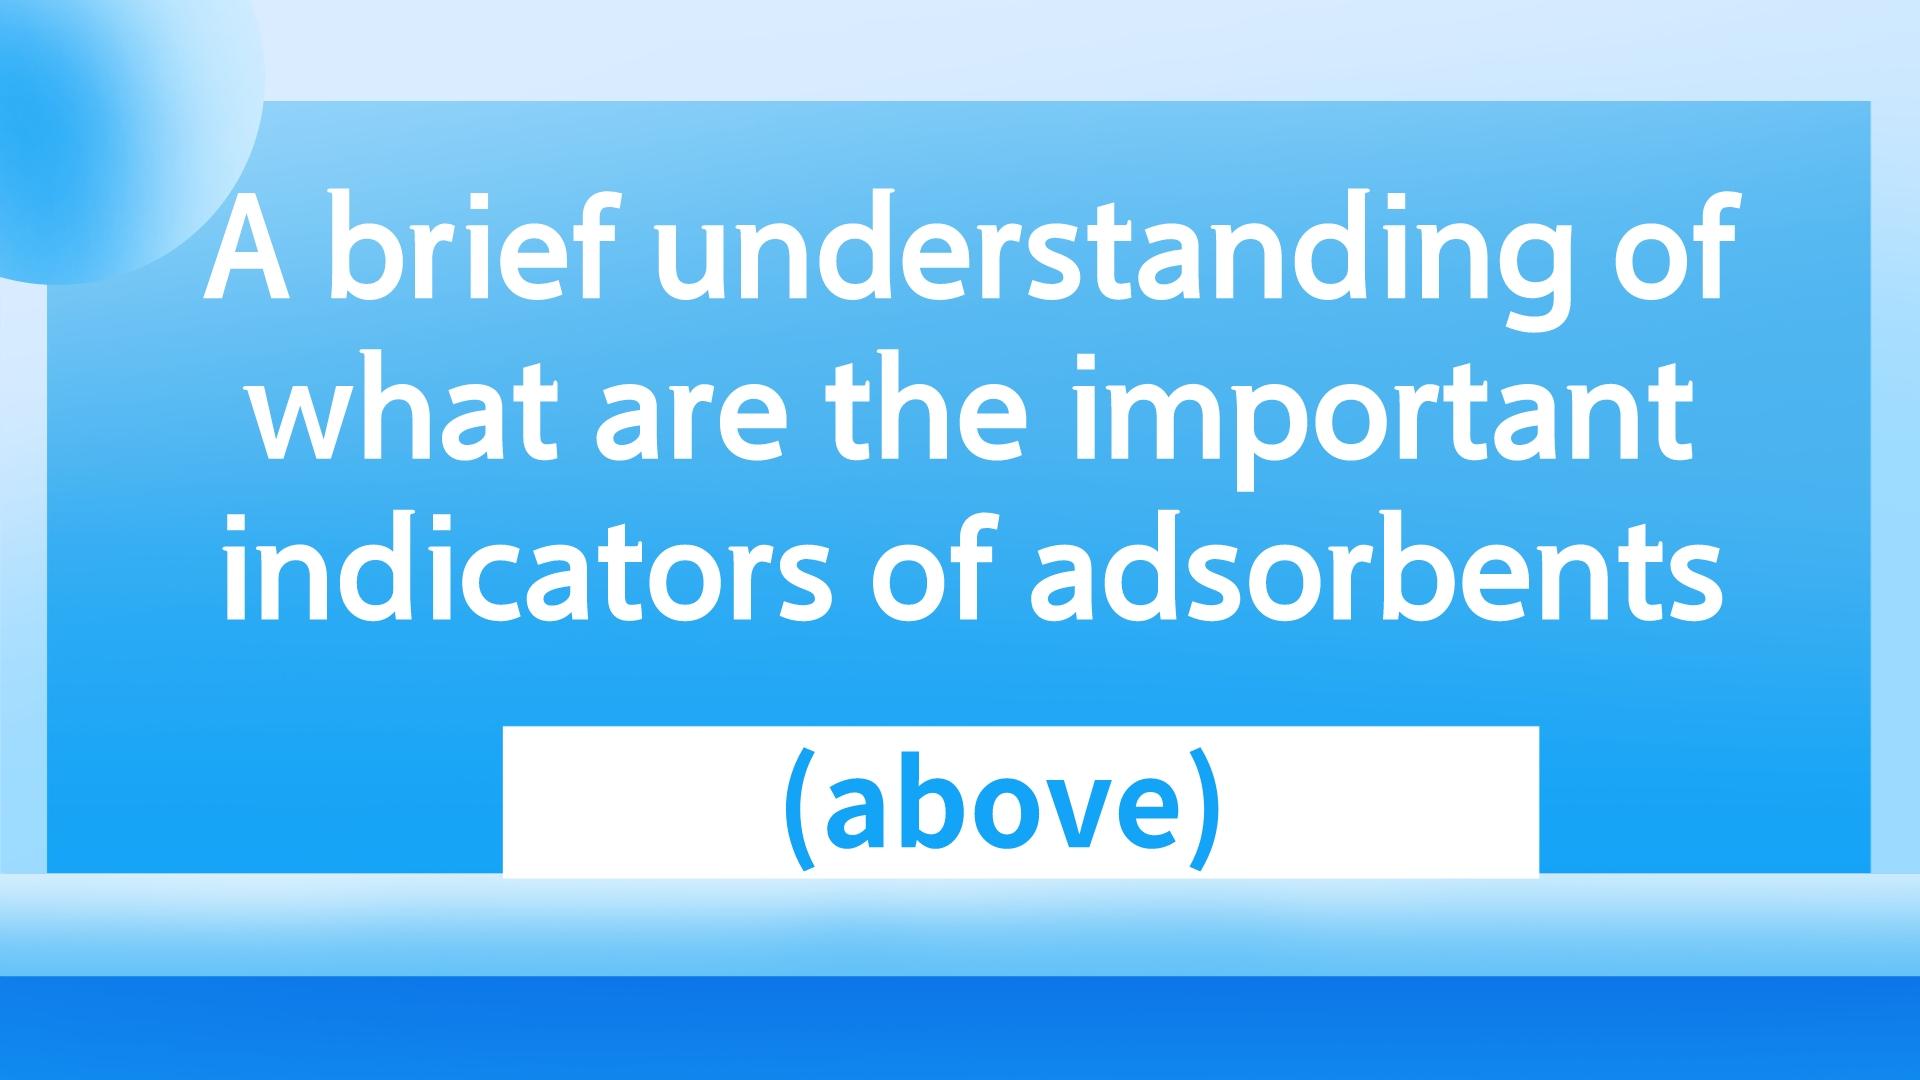 A brief understanding of what are the important indicators of adsorbents (above)